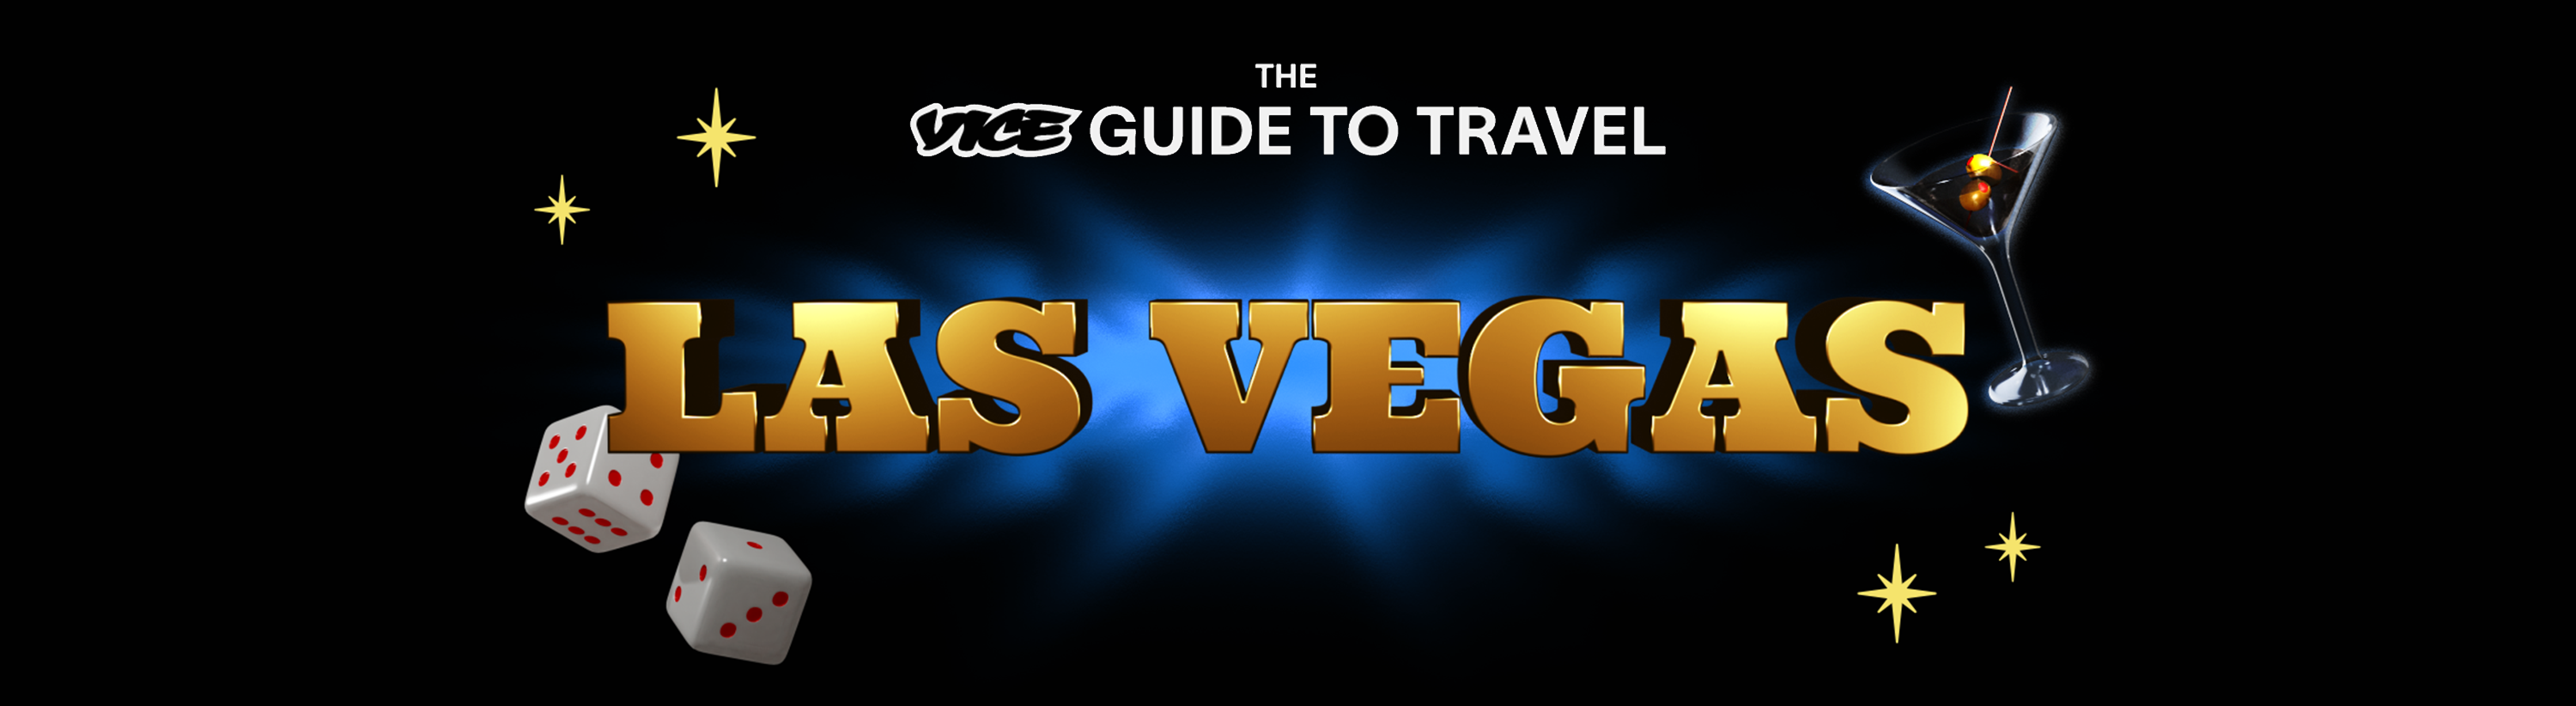 Las Vegas - What you need to know before you go - Go Guides